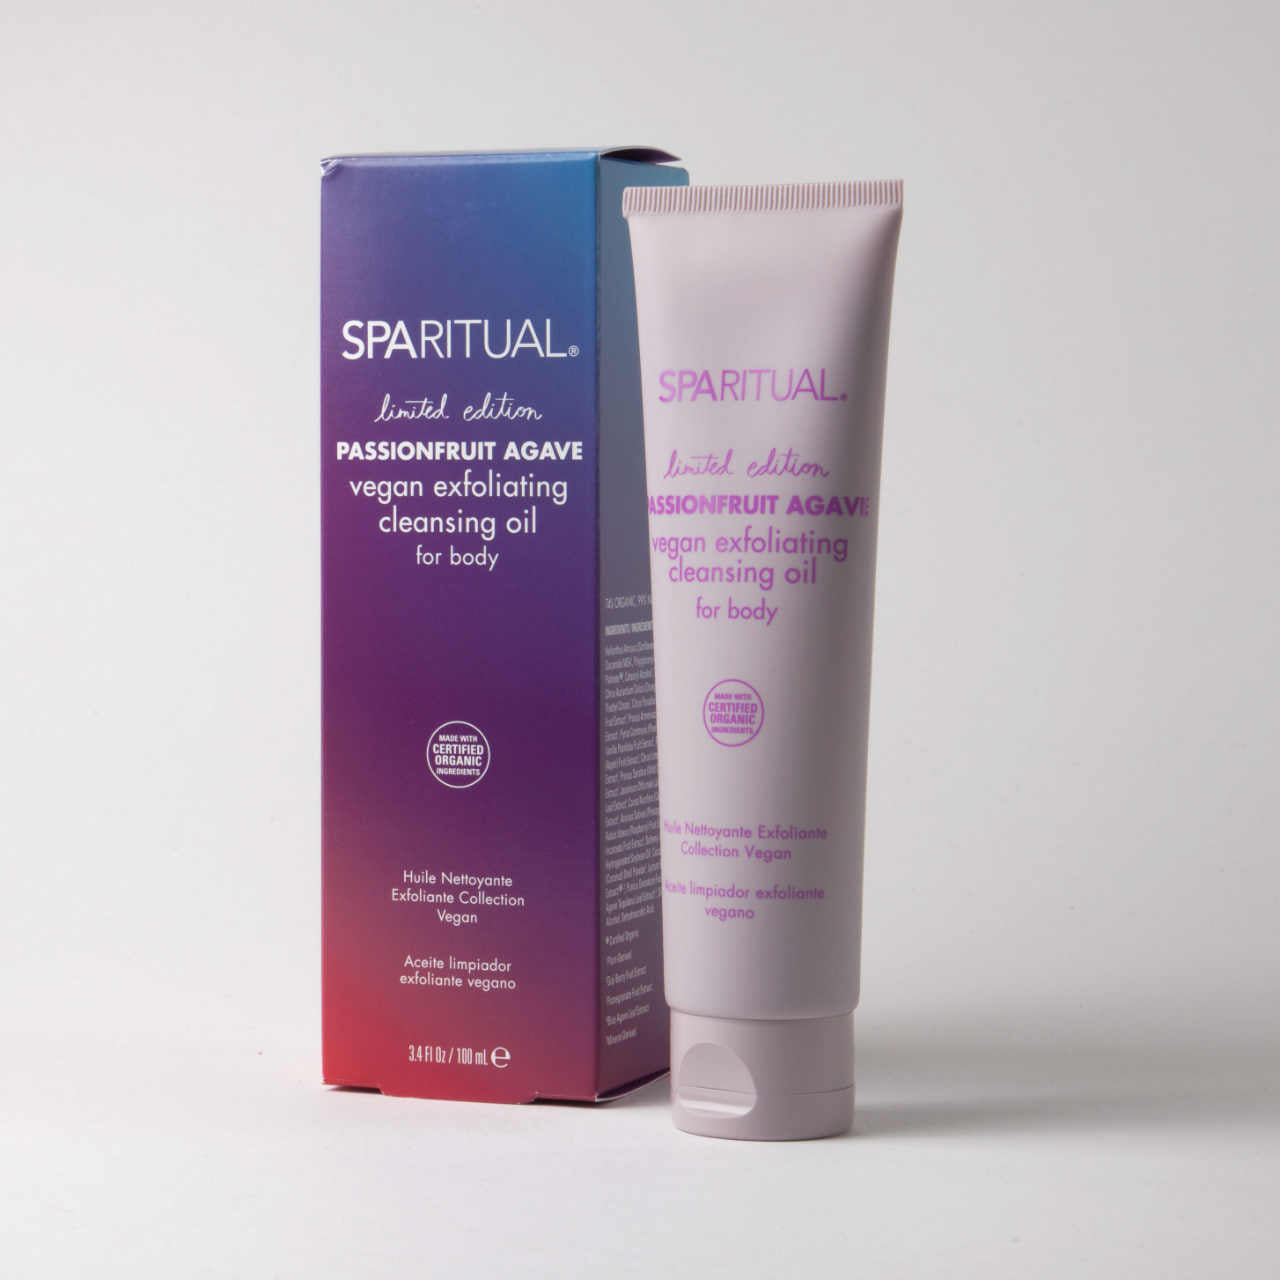 SPARITUAL Passionfruit Agave Exfoliating Cleansing Oil